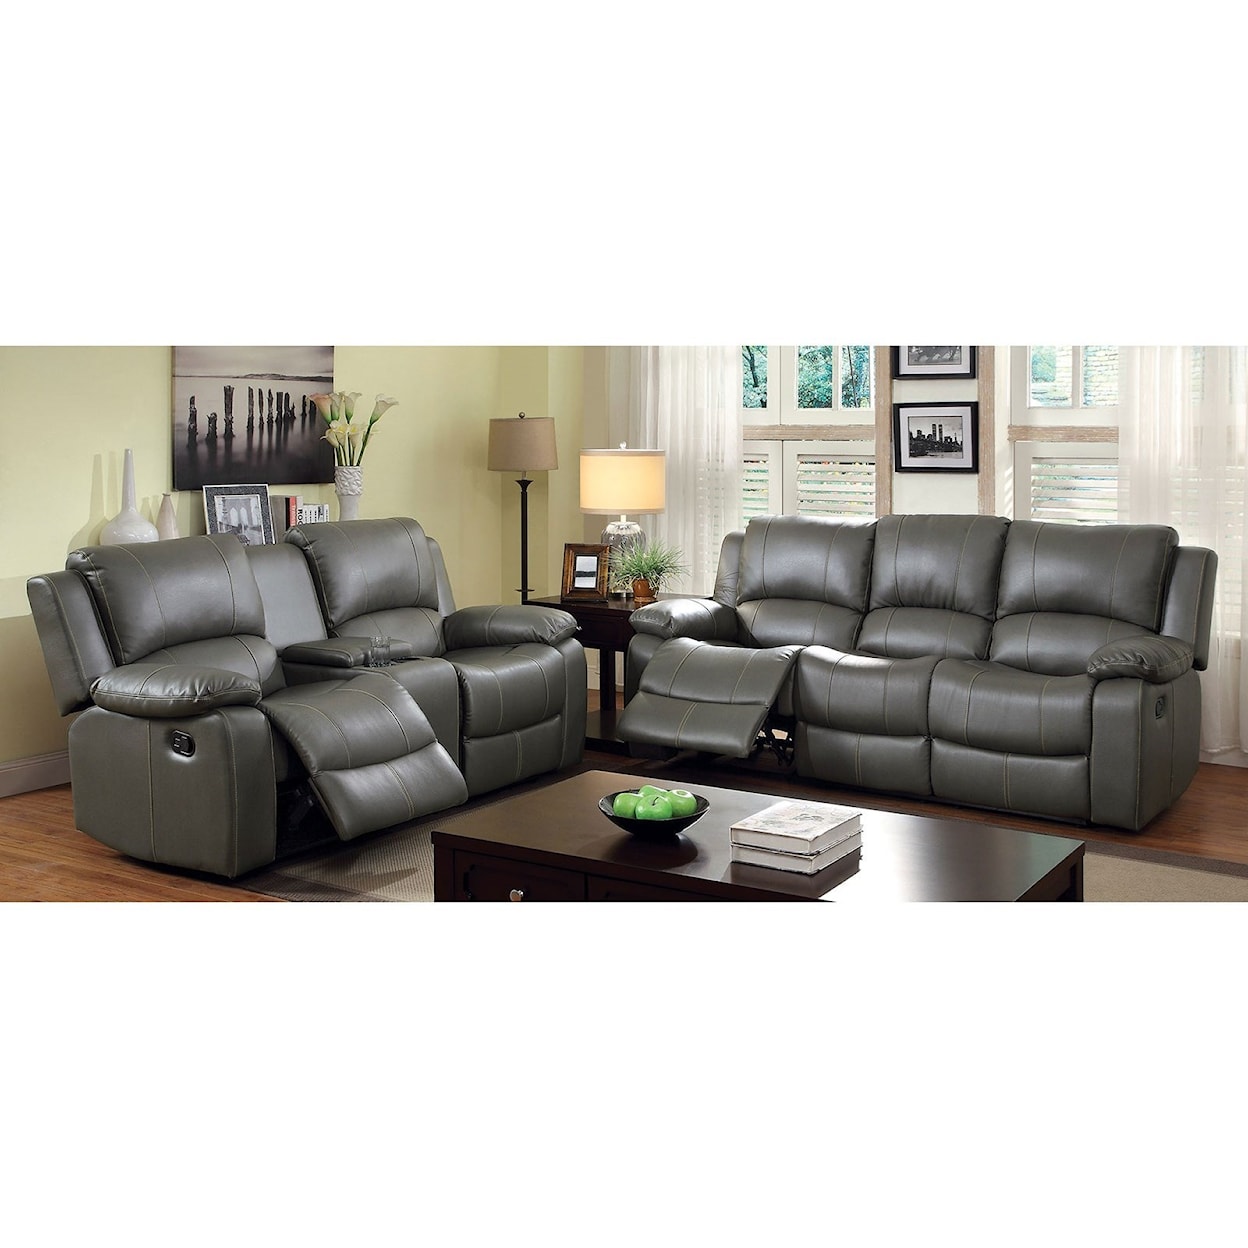 Furniture of America Sarles Motion Sofa with Drop-Down Table